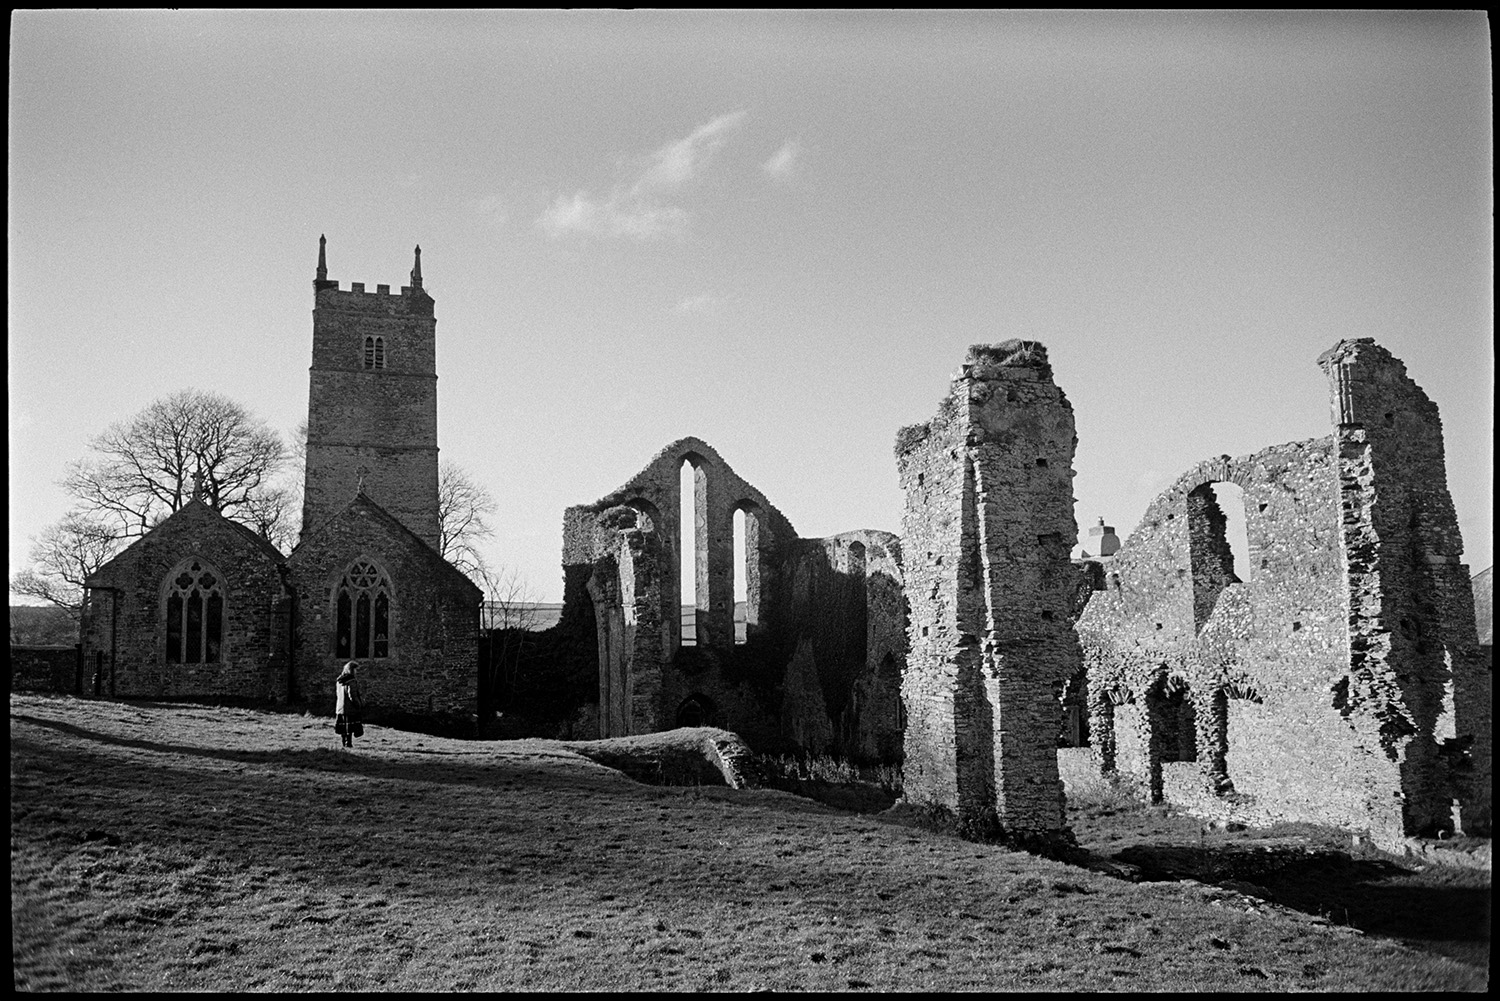 Ruined priory and graveyard.
[The ruined remains of Frithelstock Priory, next to the Church of St Mary and St Gregory, Frithelstock. A woman is standing and looking at the ruins.]